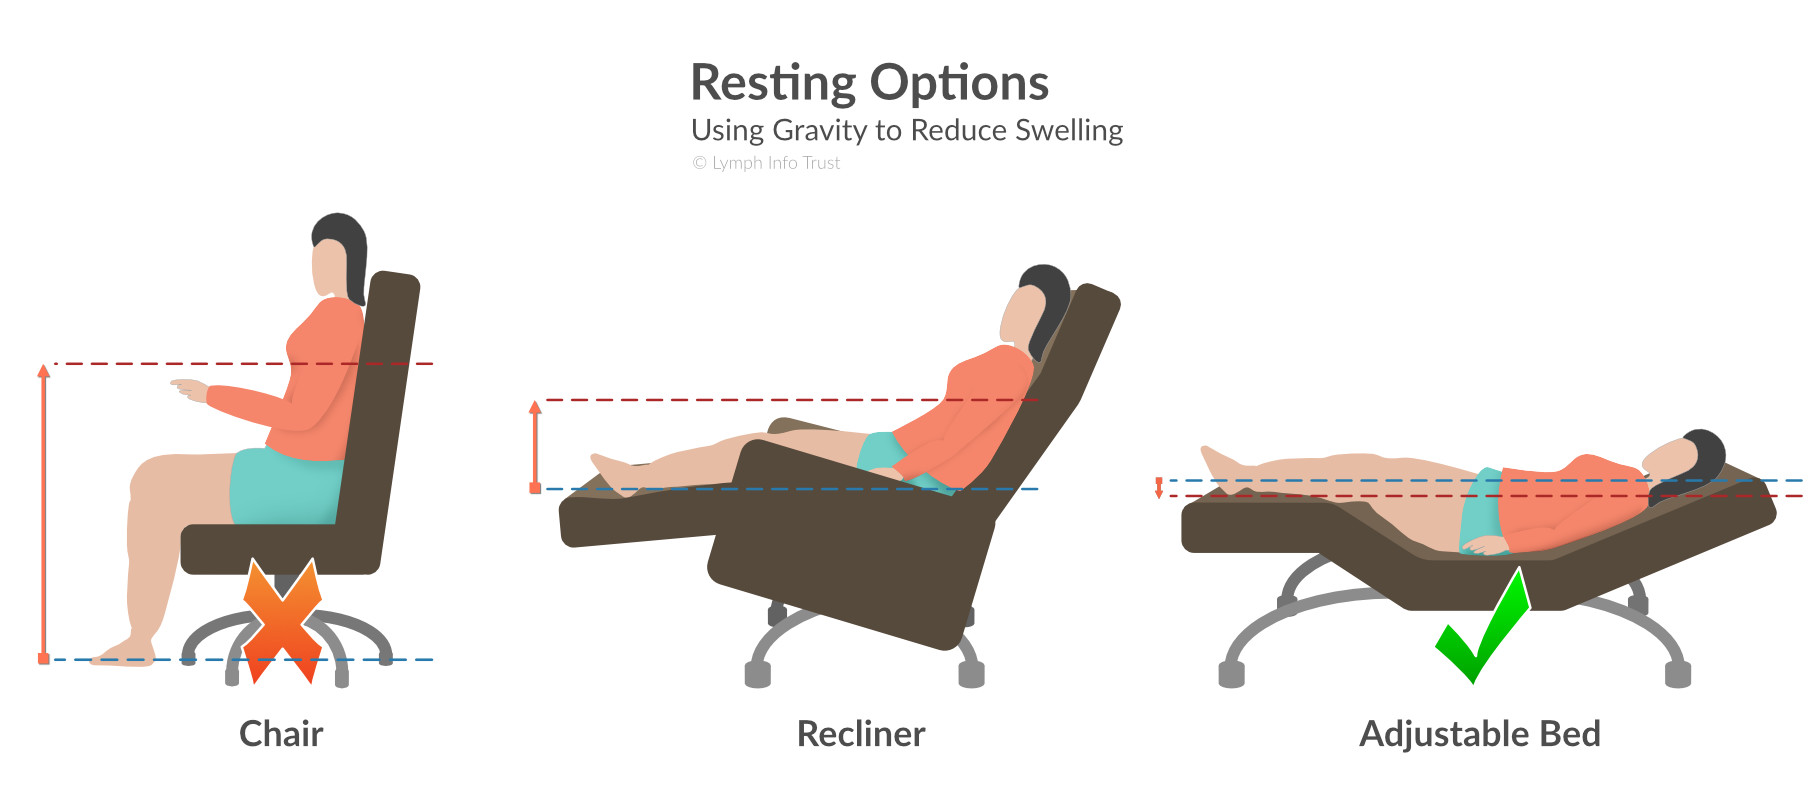 The best resting position is with your legs elevated, whether using pillows or a hospital-style bed.